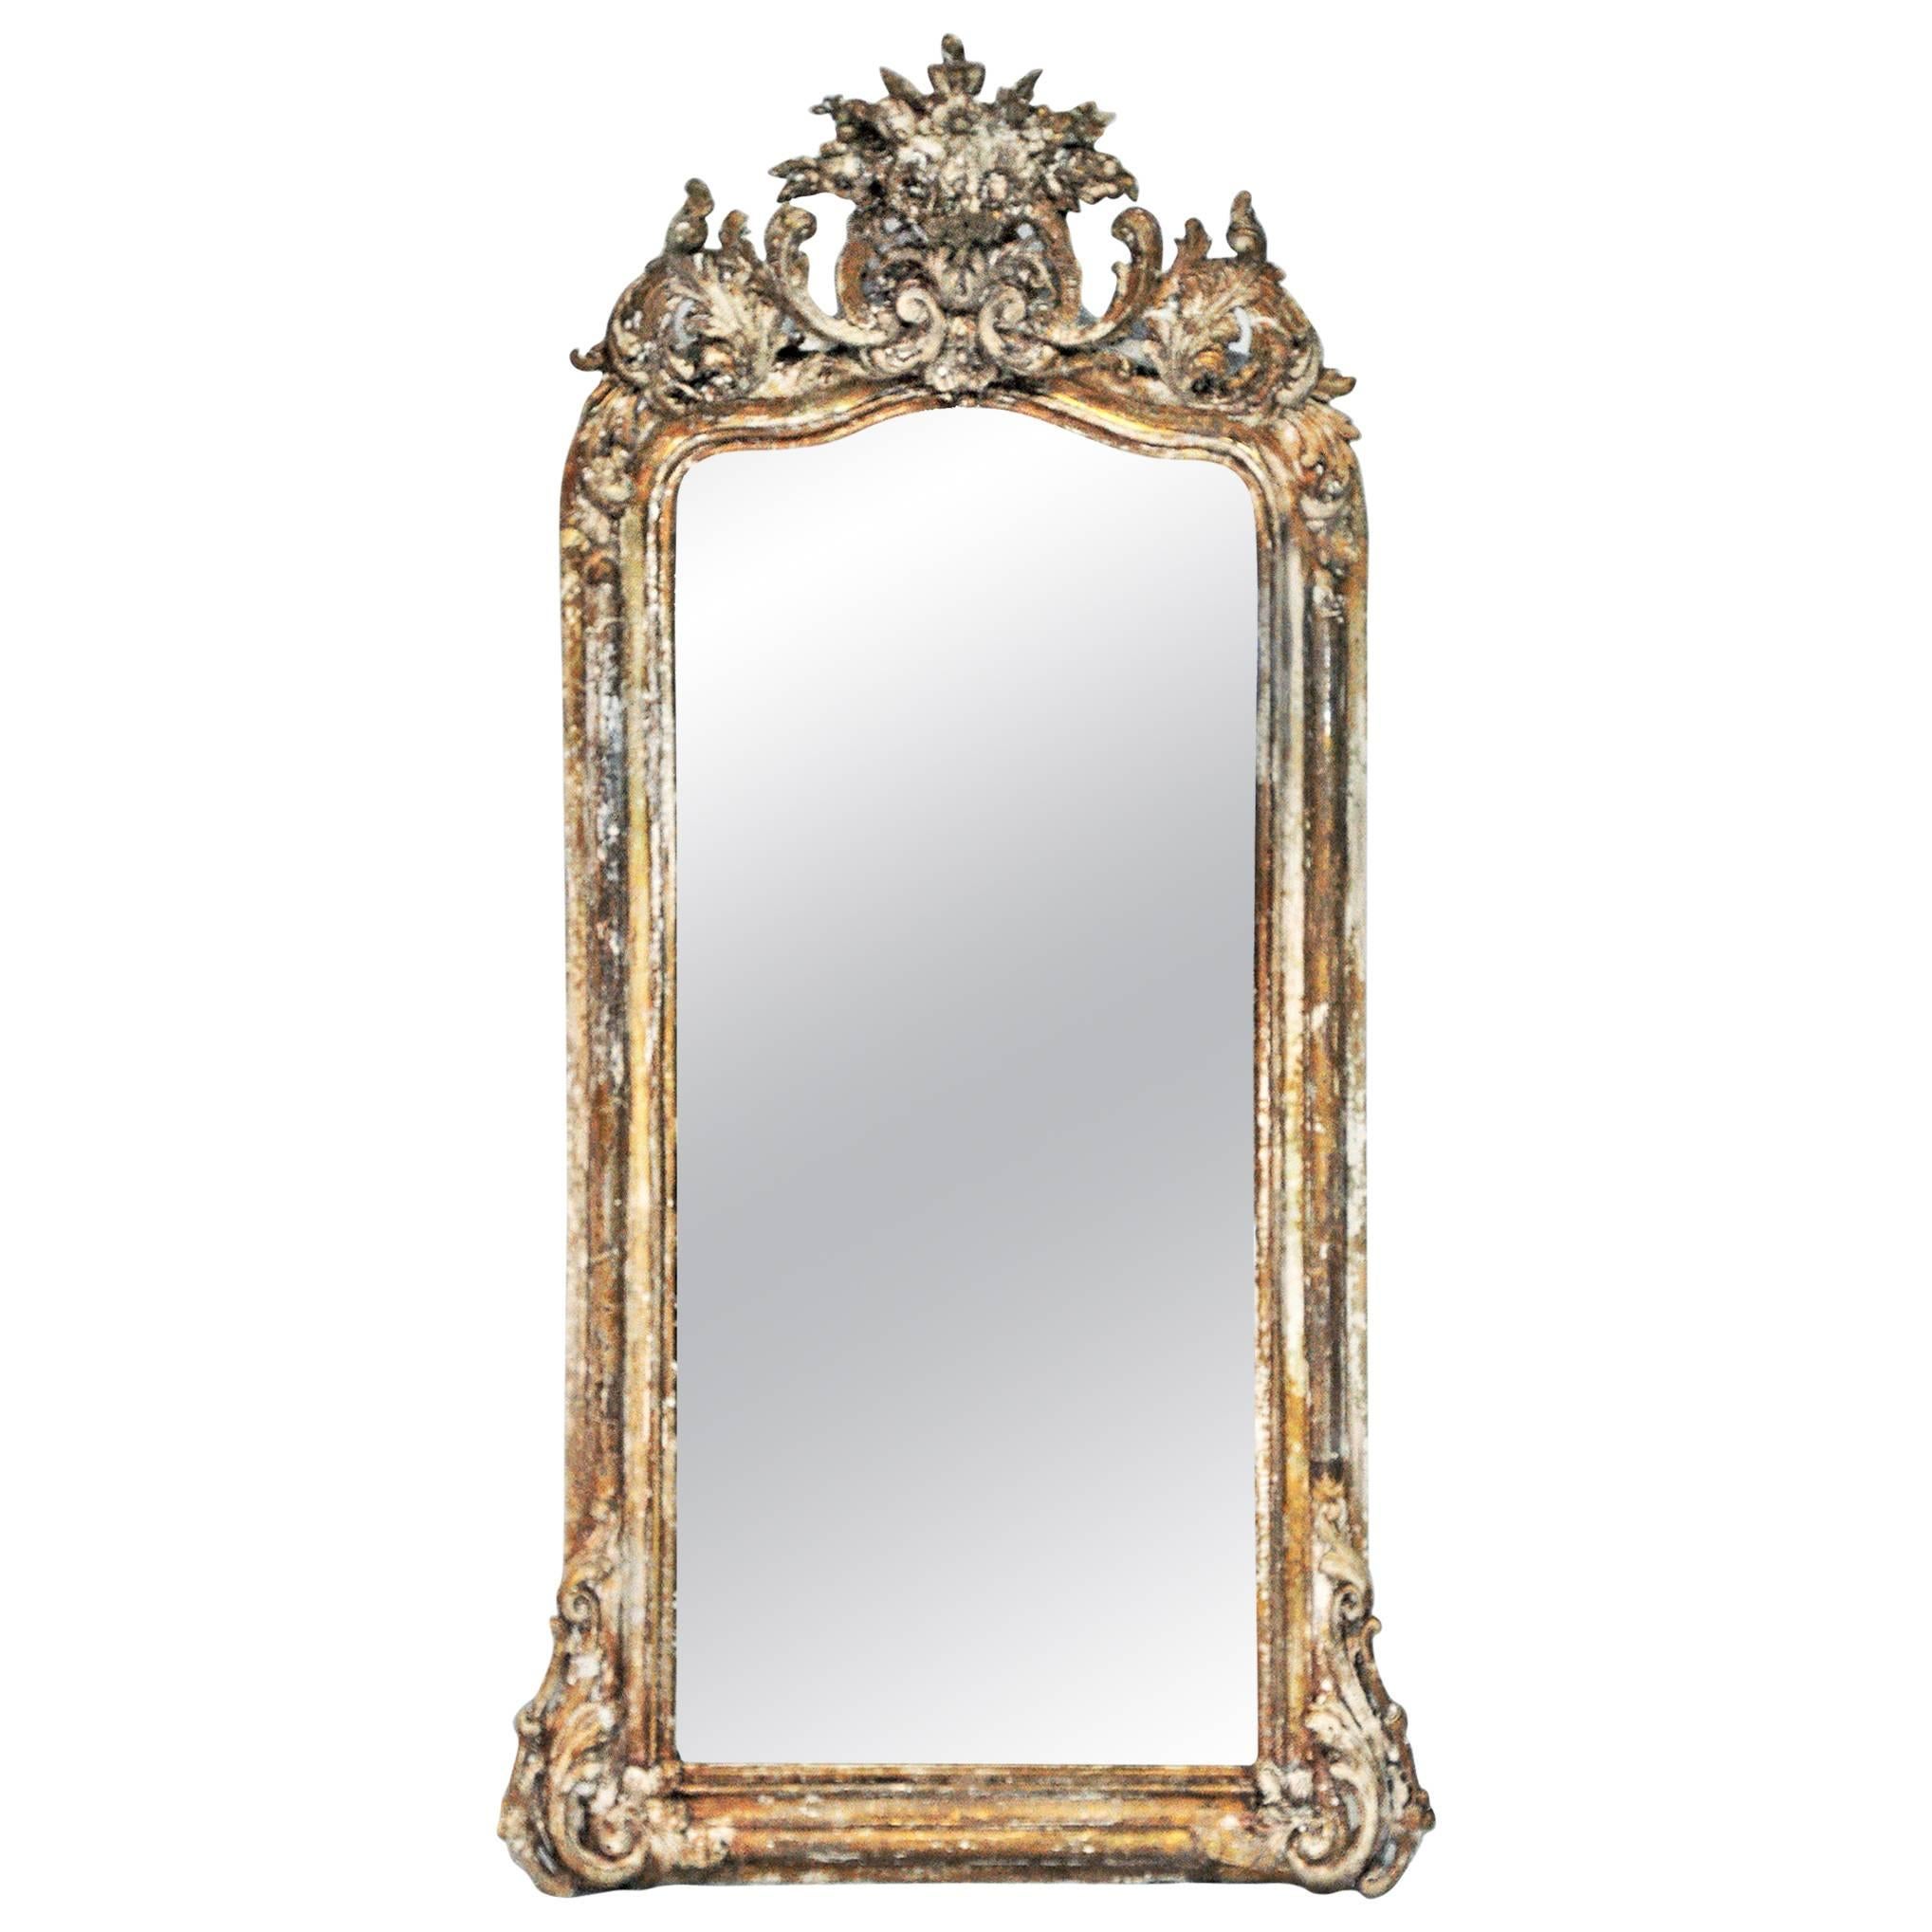 19th C. Arched Top 'Shabby Chic' Mirror w/ Partially Stripped Gold Gilt Finish